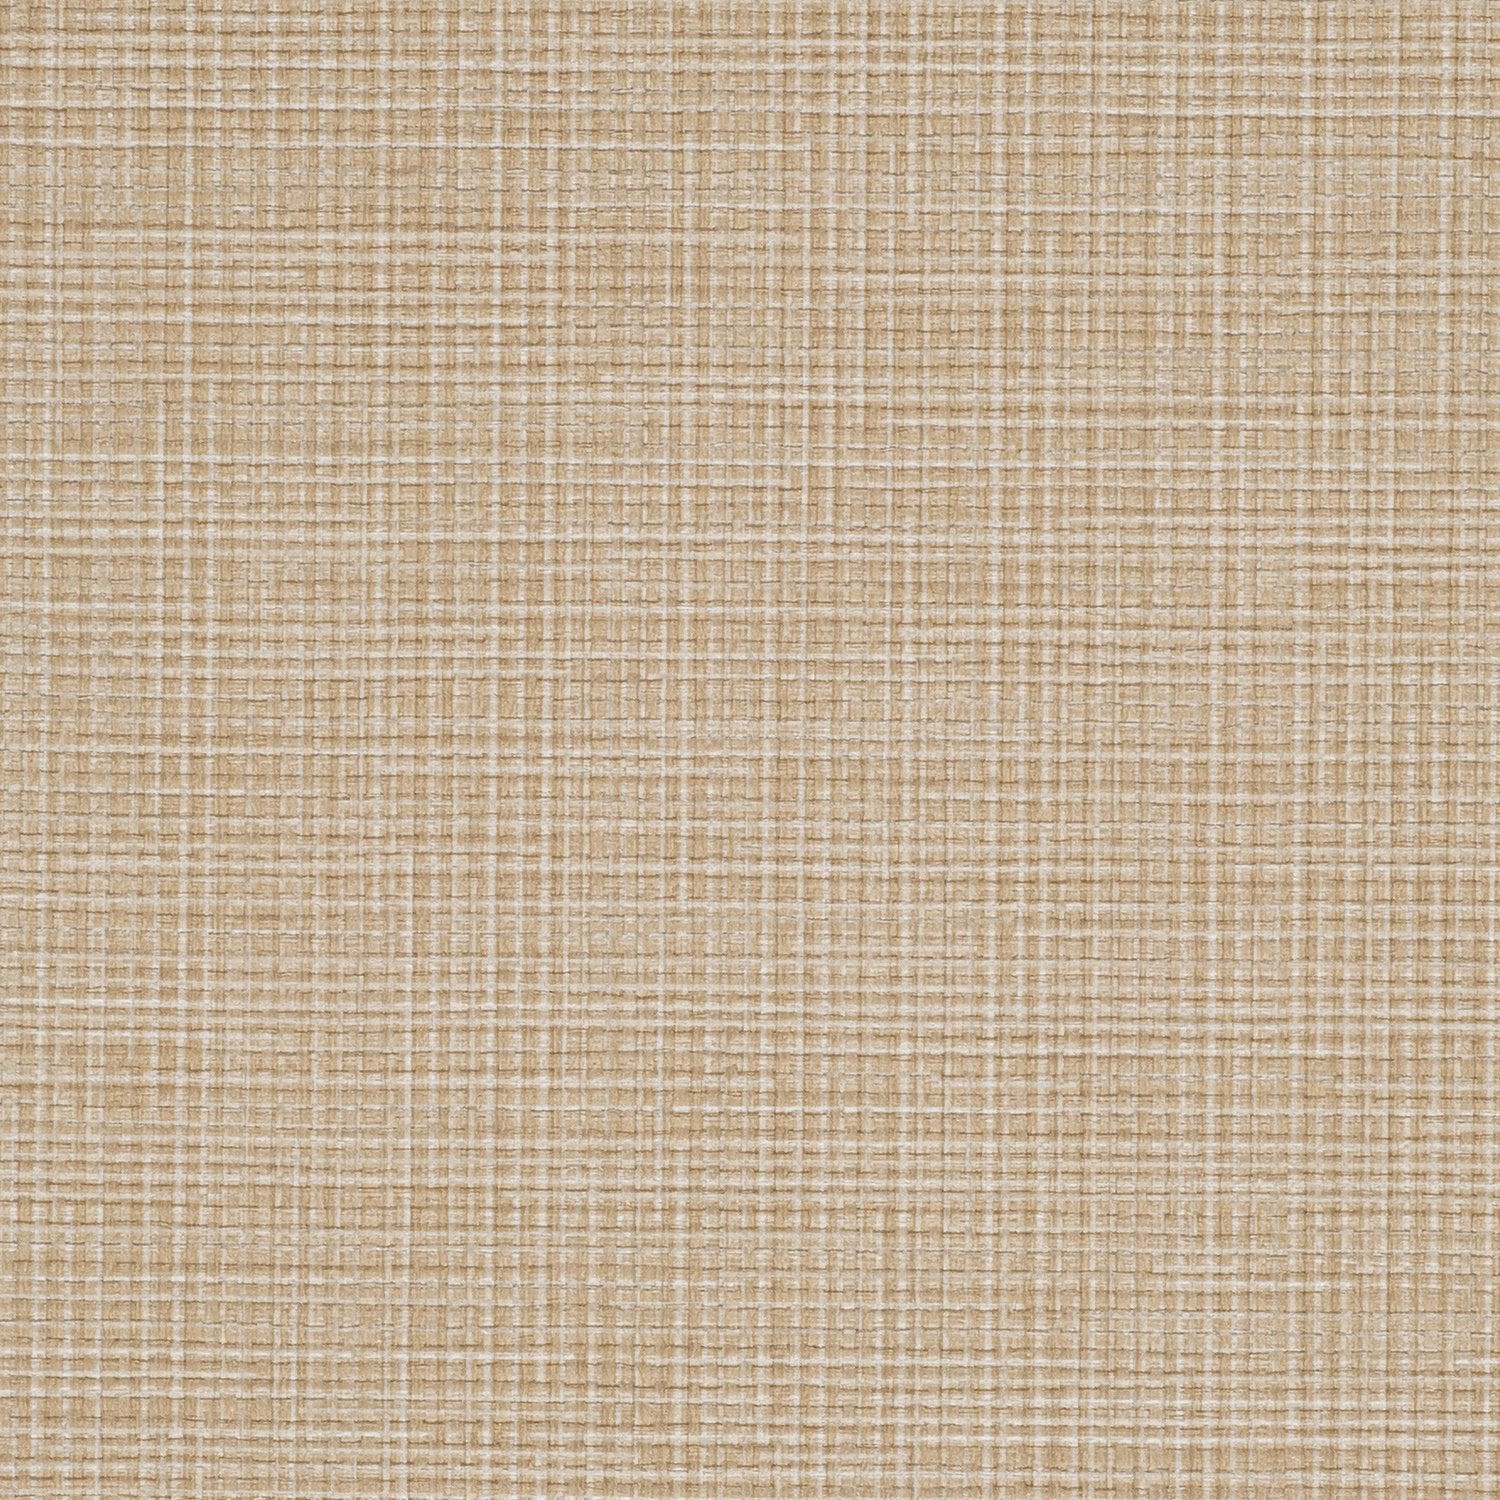 Pave - Y46297 - Wallcovering - Vycon - Kube Contract